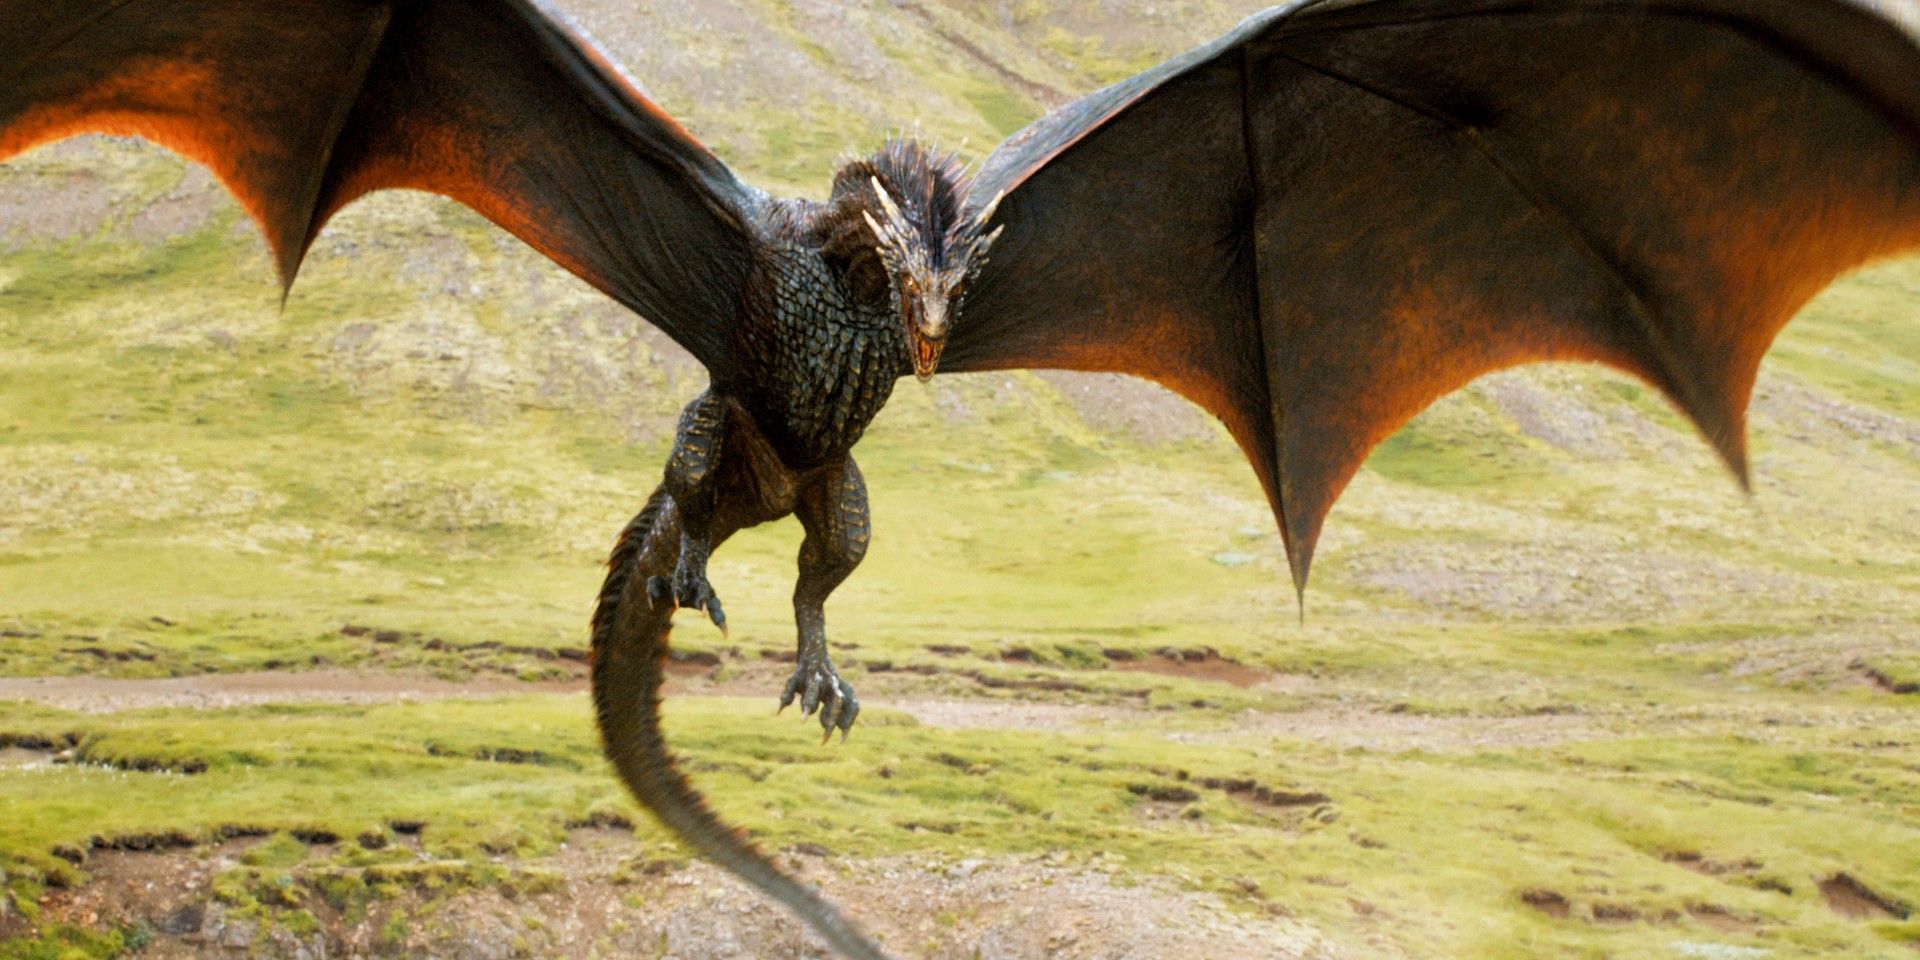 Game Of Thrones 15 Events And Stories We NEED To See In The Spinoffs